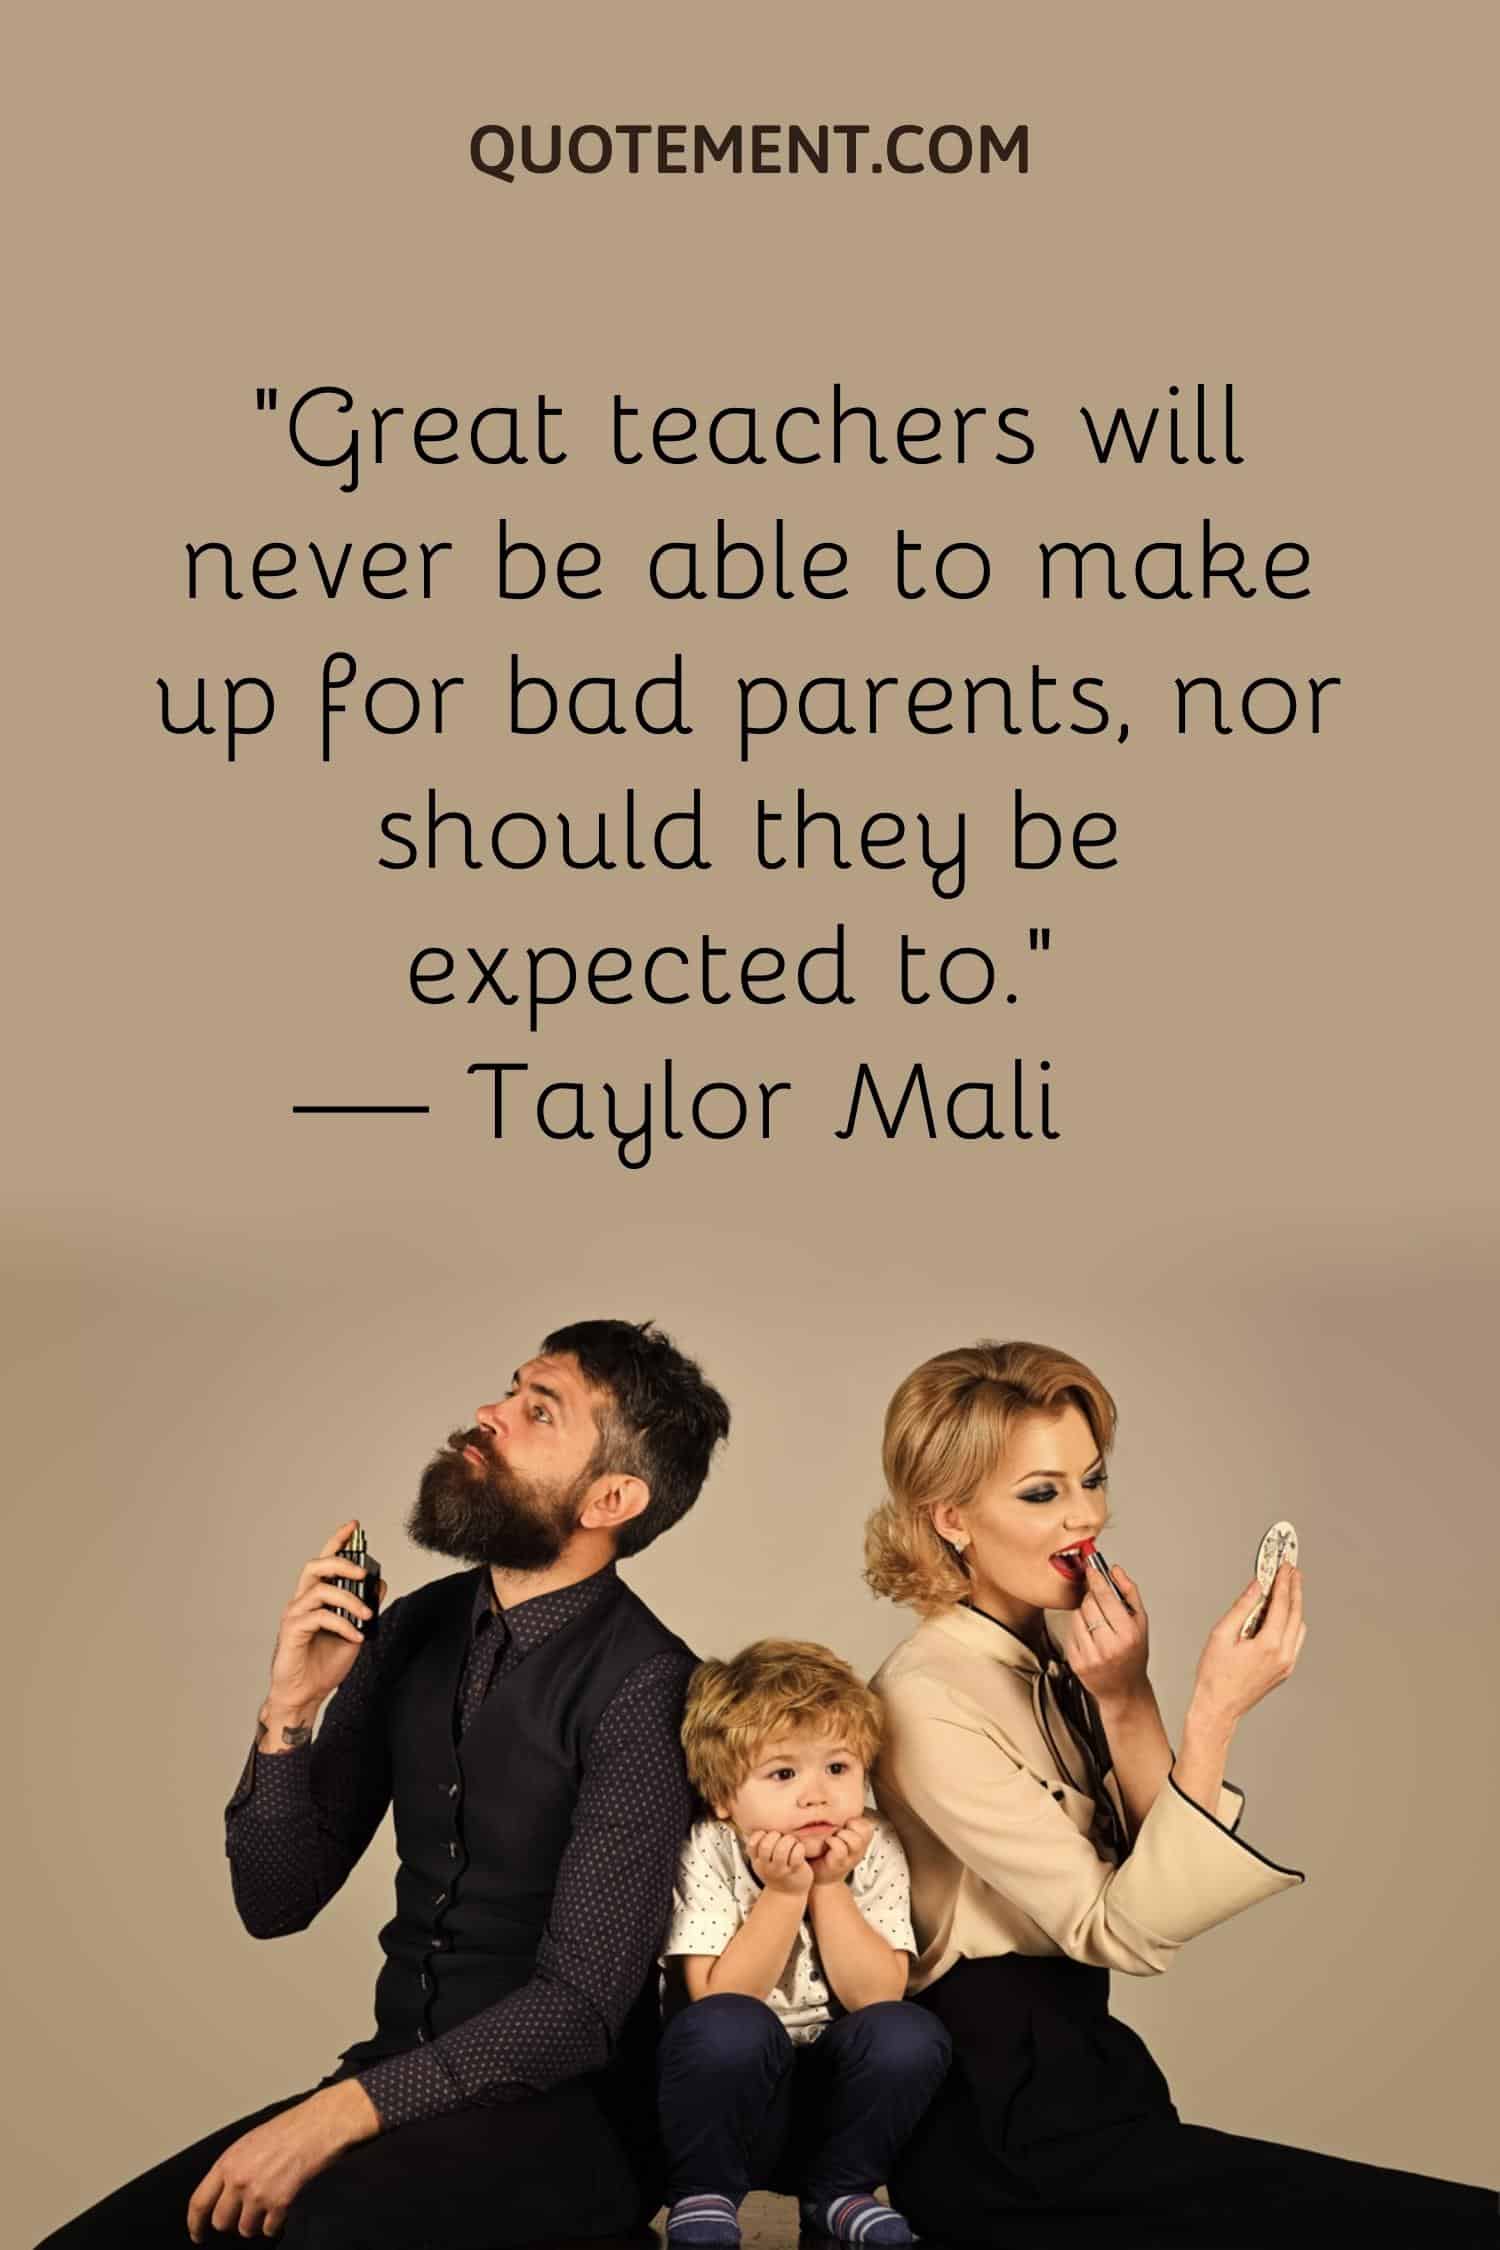 Great teachers will never be able to make up for bad parents